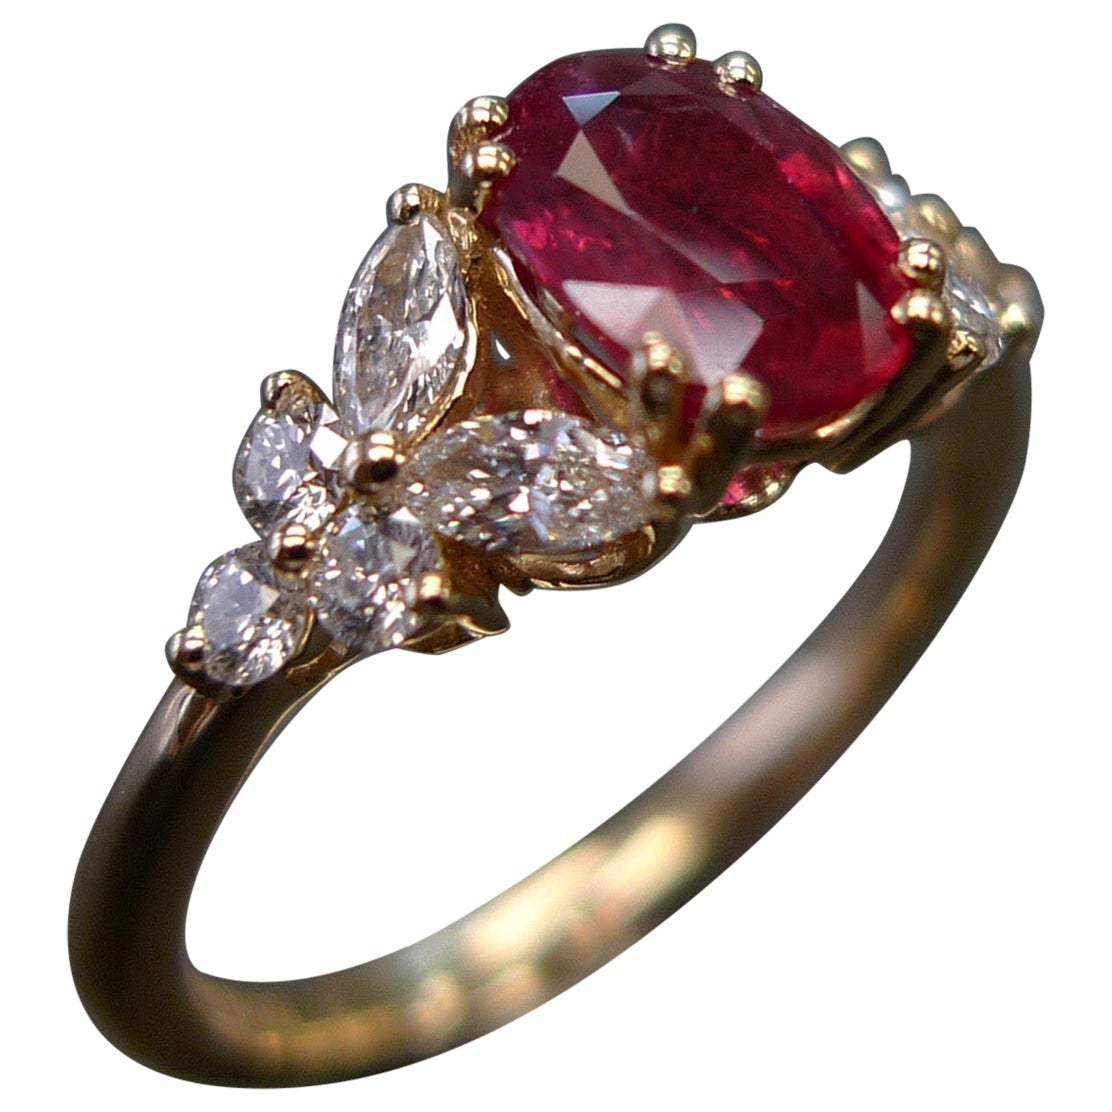 For Sale:  Natural Genuine Ruby and Marquise Diamonds Ring Made in 14k Yellow Gold